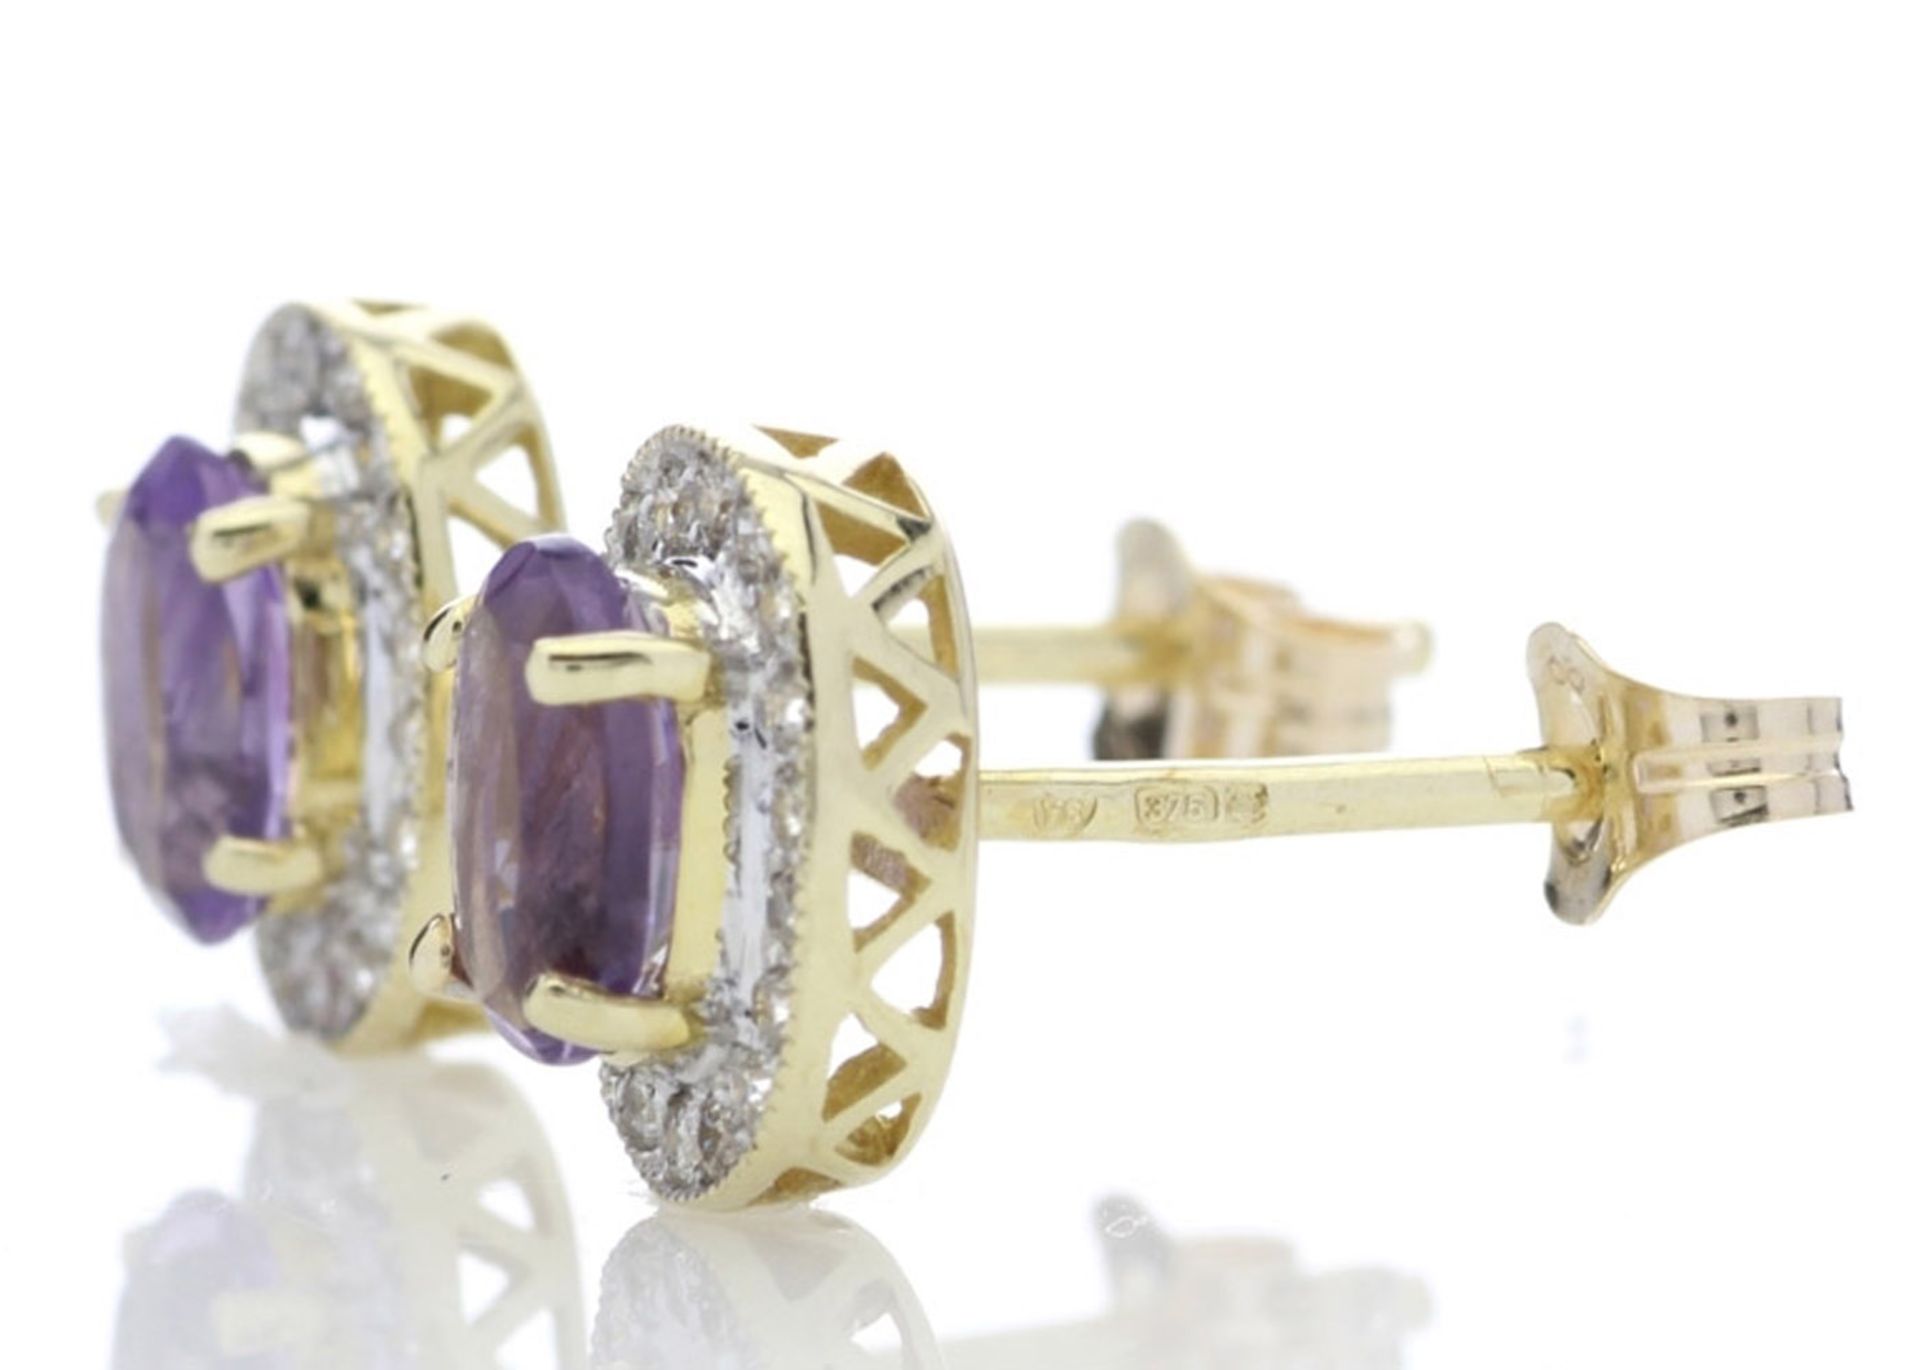 9ct Yellow Gold Amethyst and Diamond Cluster Earring (A0.86) 0.18 Carats - Image 6 of 7